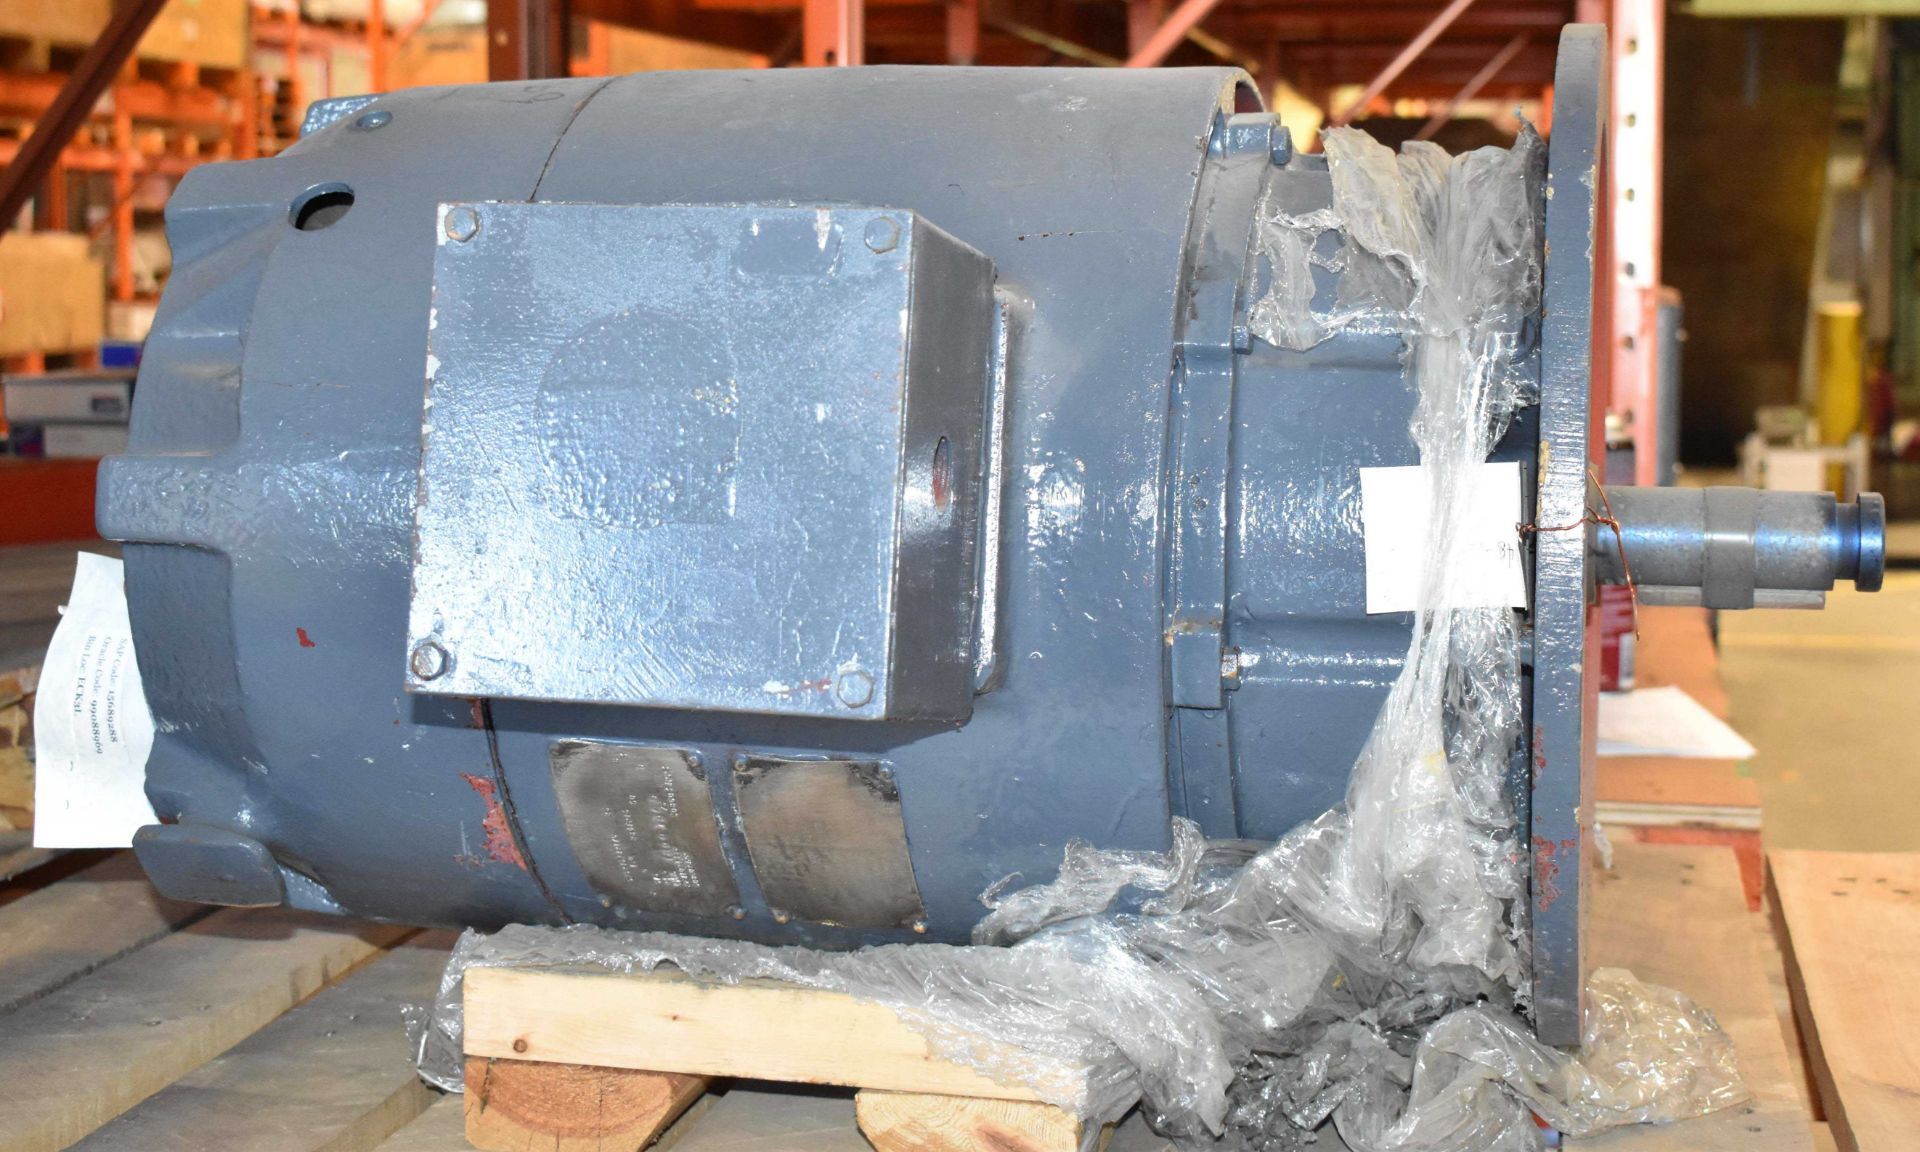 GENERAL ELECTRIC 10 HP ELECTRIC MOTOR WITH 575V, 3PH, 60HZ (CMD WAREHOUSE - 10070202) - Image 2 of 3